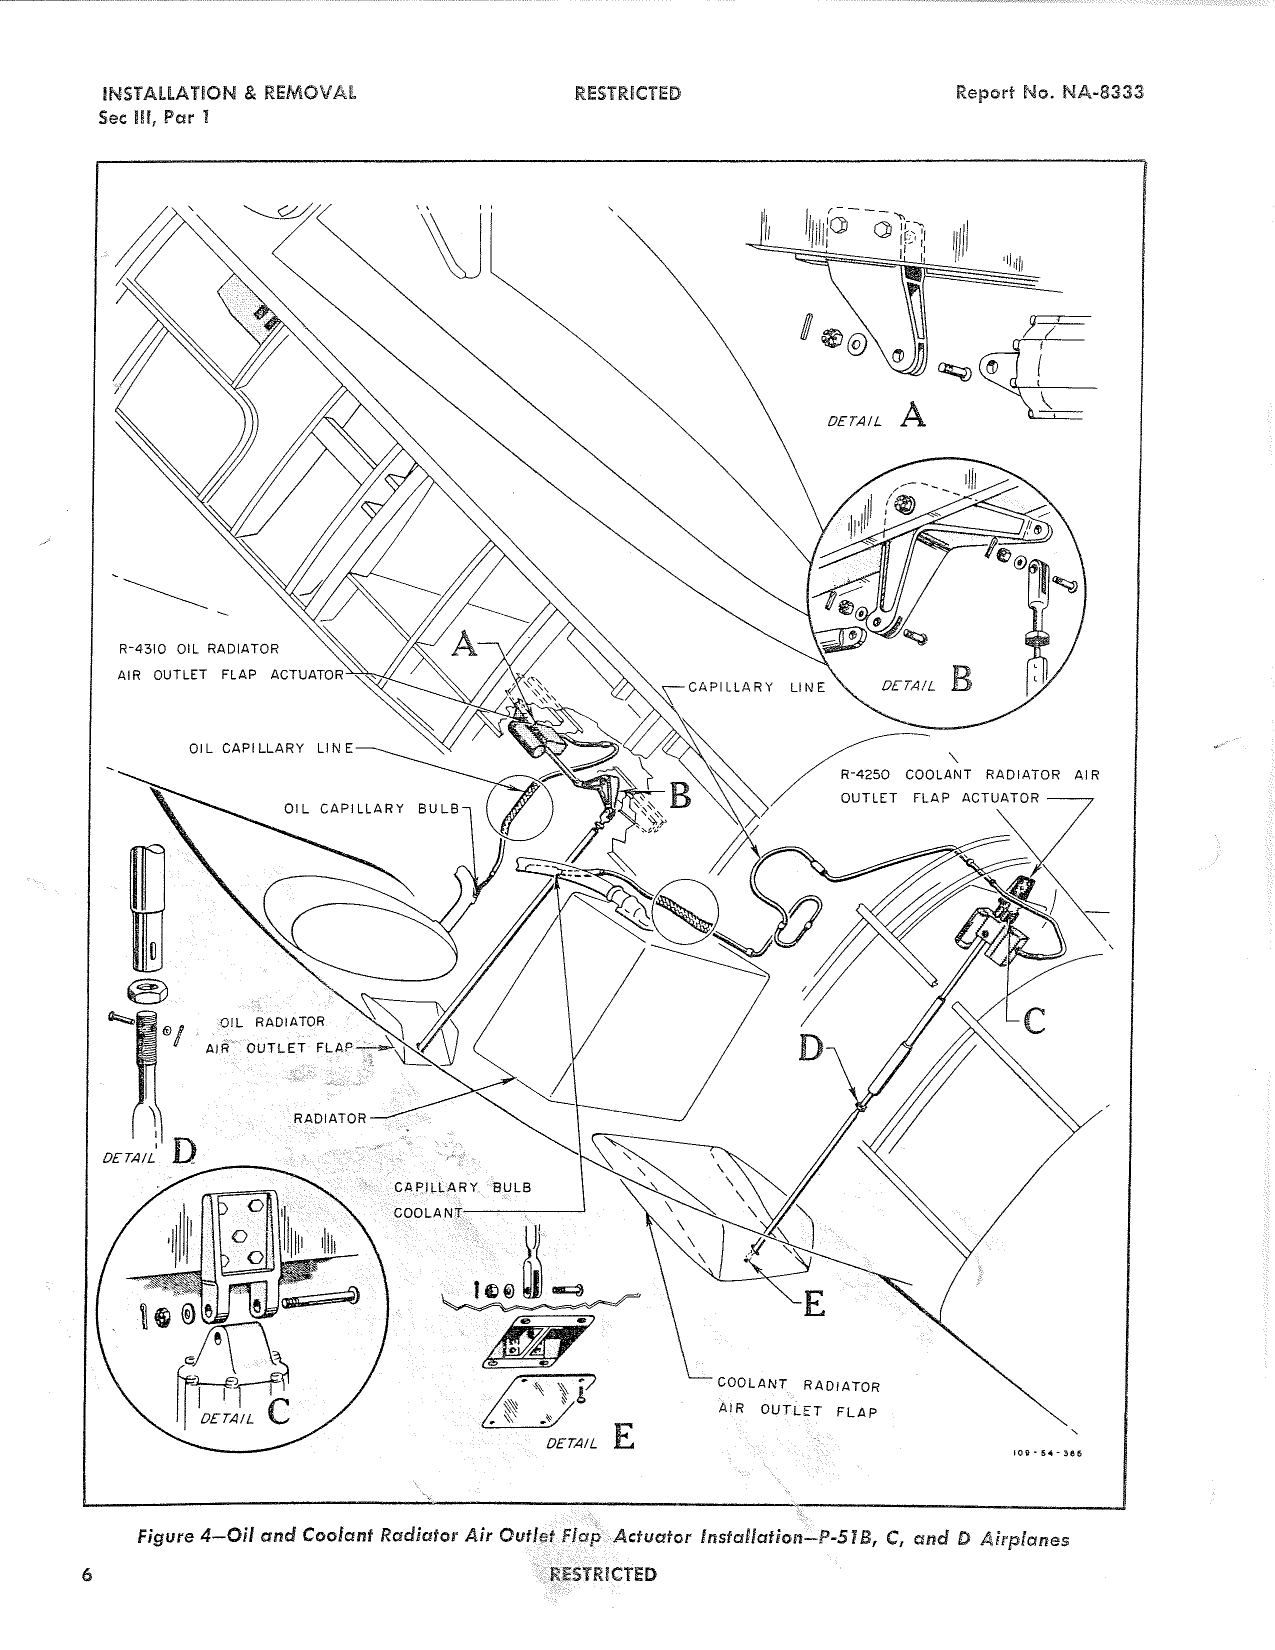 Sample page 9 from AirCorps Library document: Service Manual for Robertshaw Actuators Models R-4310 and R-4250